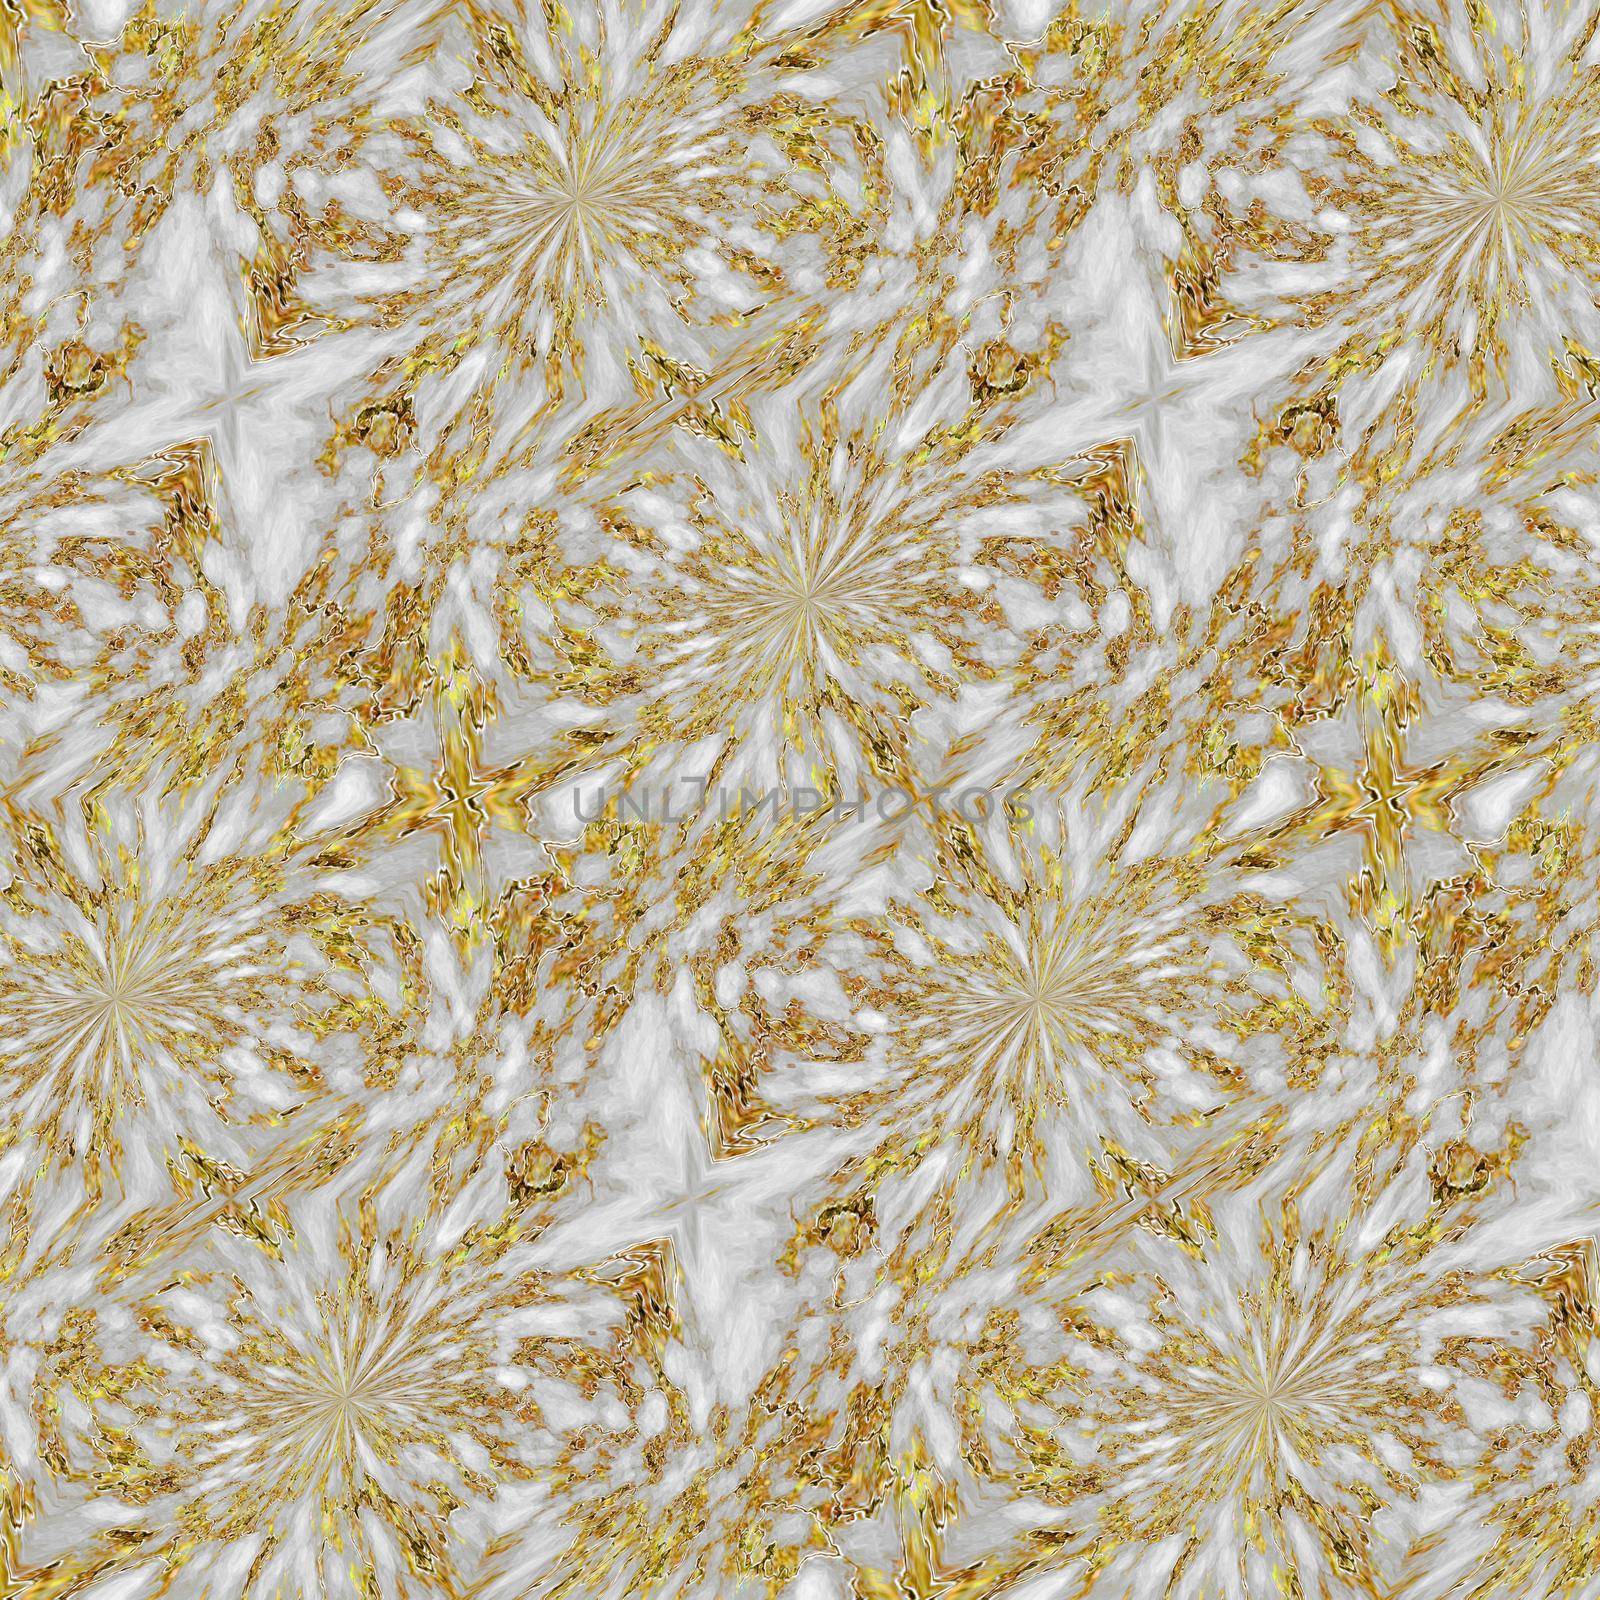 Amazing abstract marble background with flowers texture. Seamless pattern. Golden and white colours. Design for decor, prints, textile, furniture, cloth, digital.